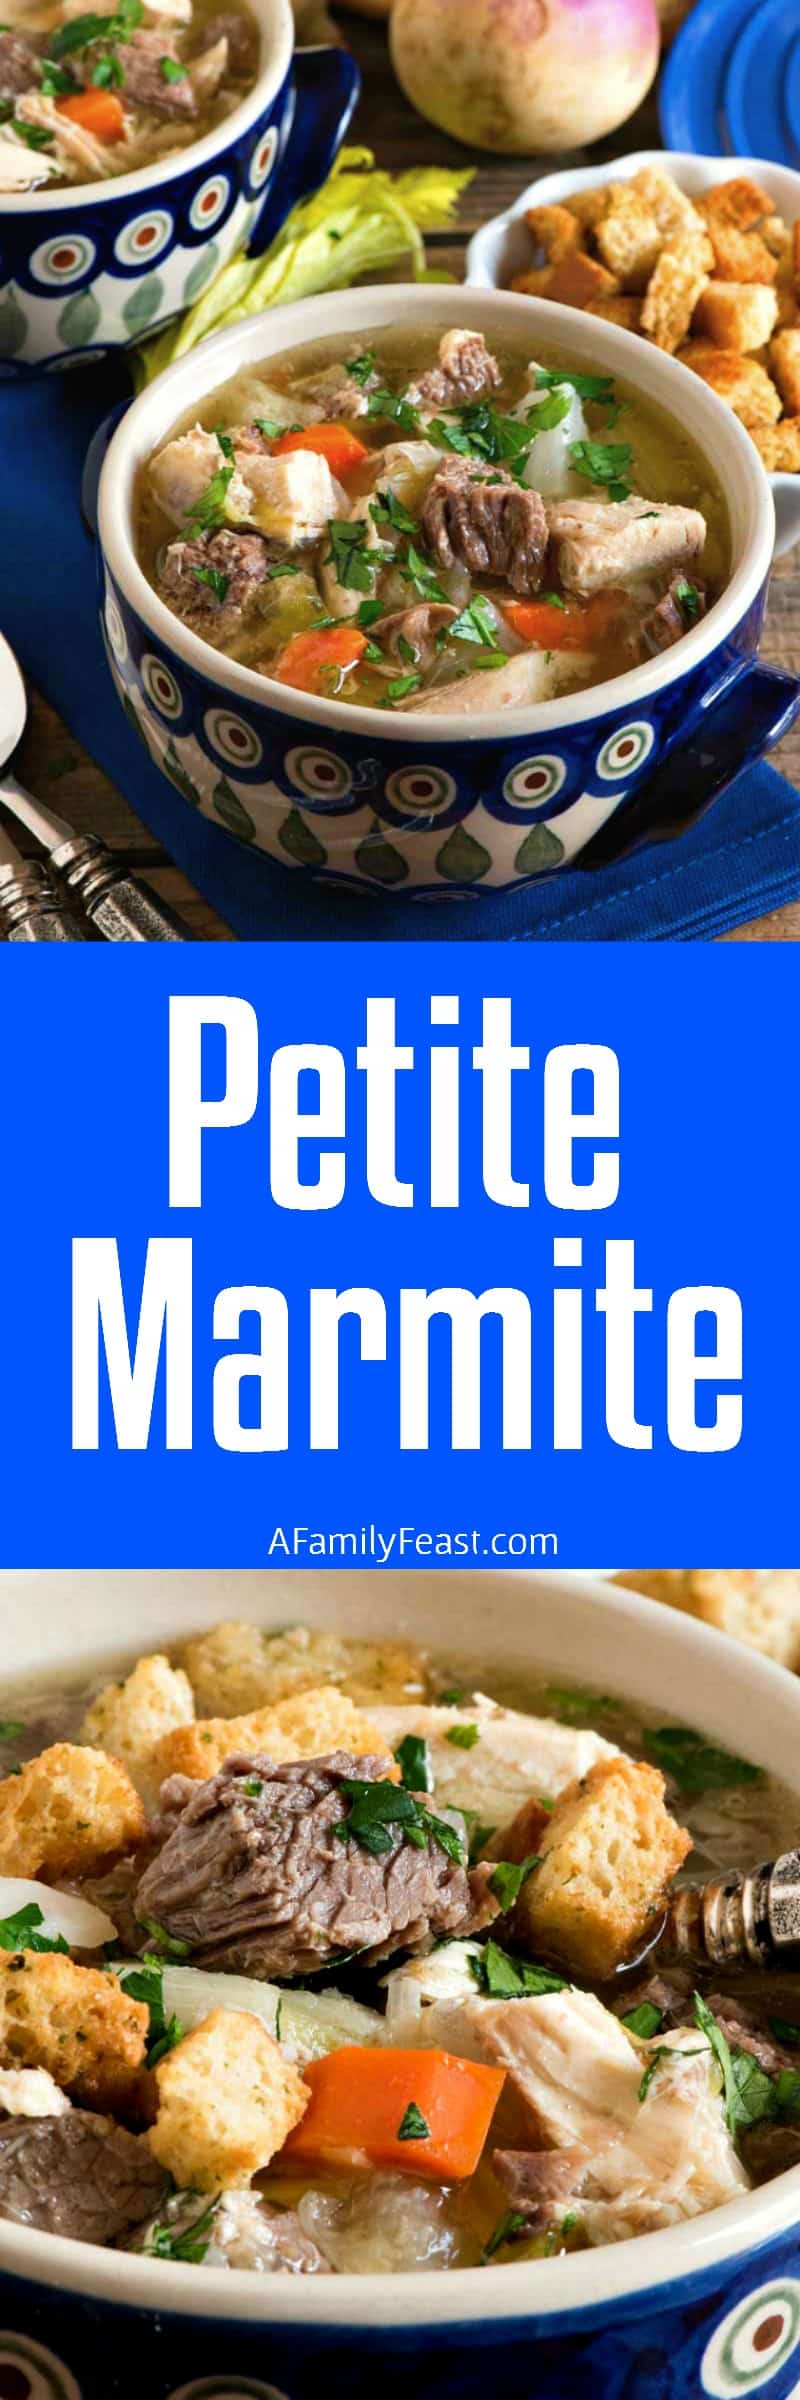 Petite Marmite is a delicious, flavorful soup made from a variety of meats and vegetables. See how to make this classic French soup right here!